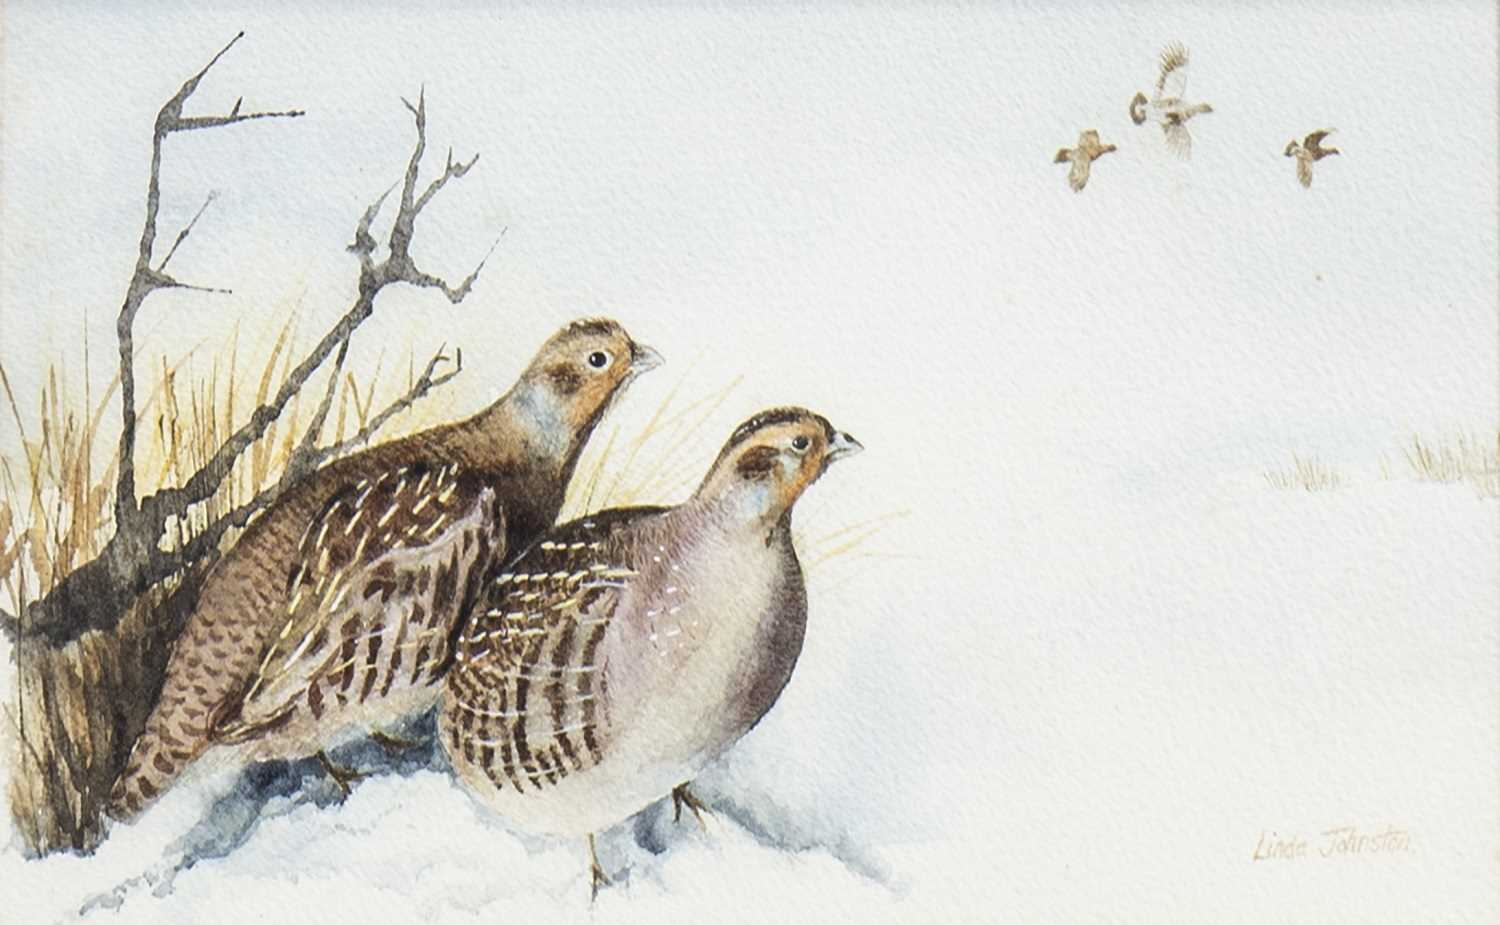 Lot 645 - GROUSE IN THE SNOW, A WATERCOLOUR BY LINDA JOHNSTON